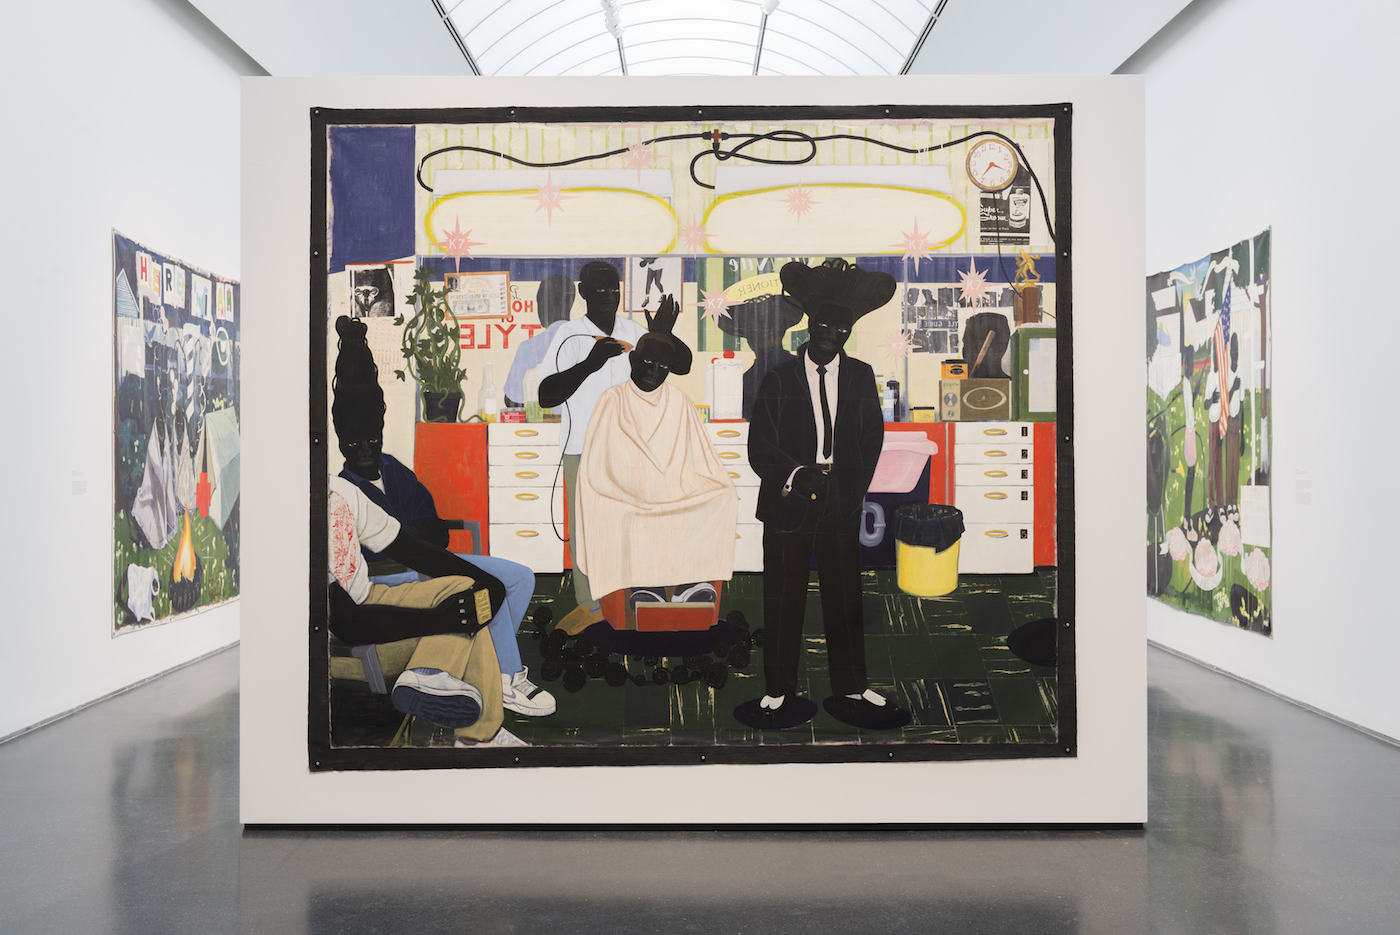 Installation view of 'Kerry James Marshall: Mastry' at the Museum of Contemporary Art Chicago (photo by Nathan Keay, © MCA Chicago)